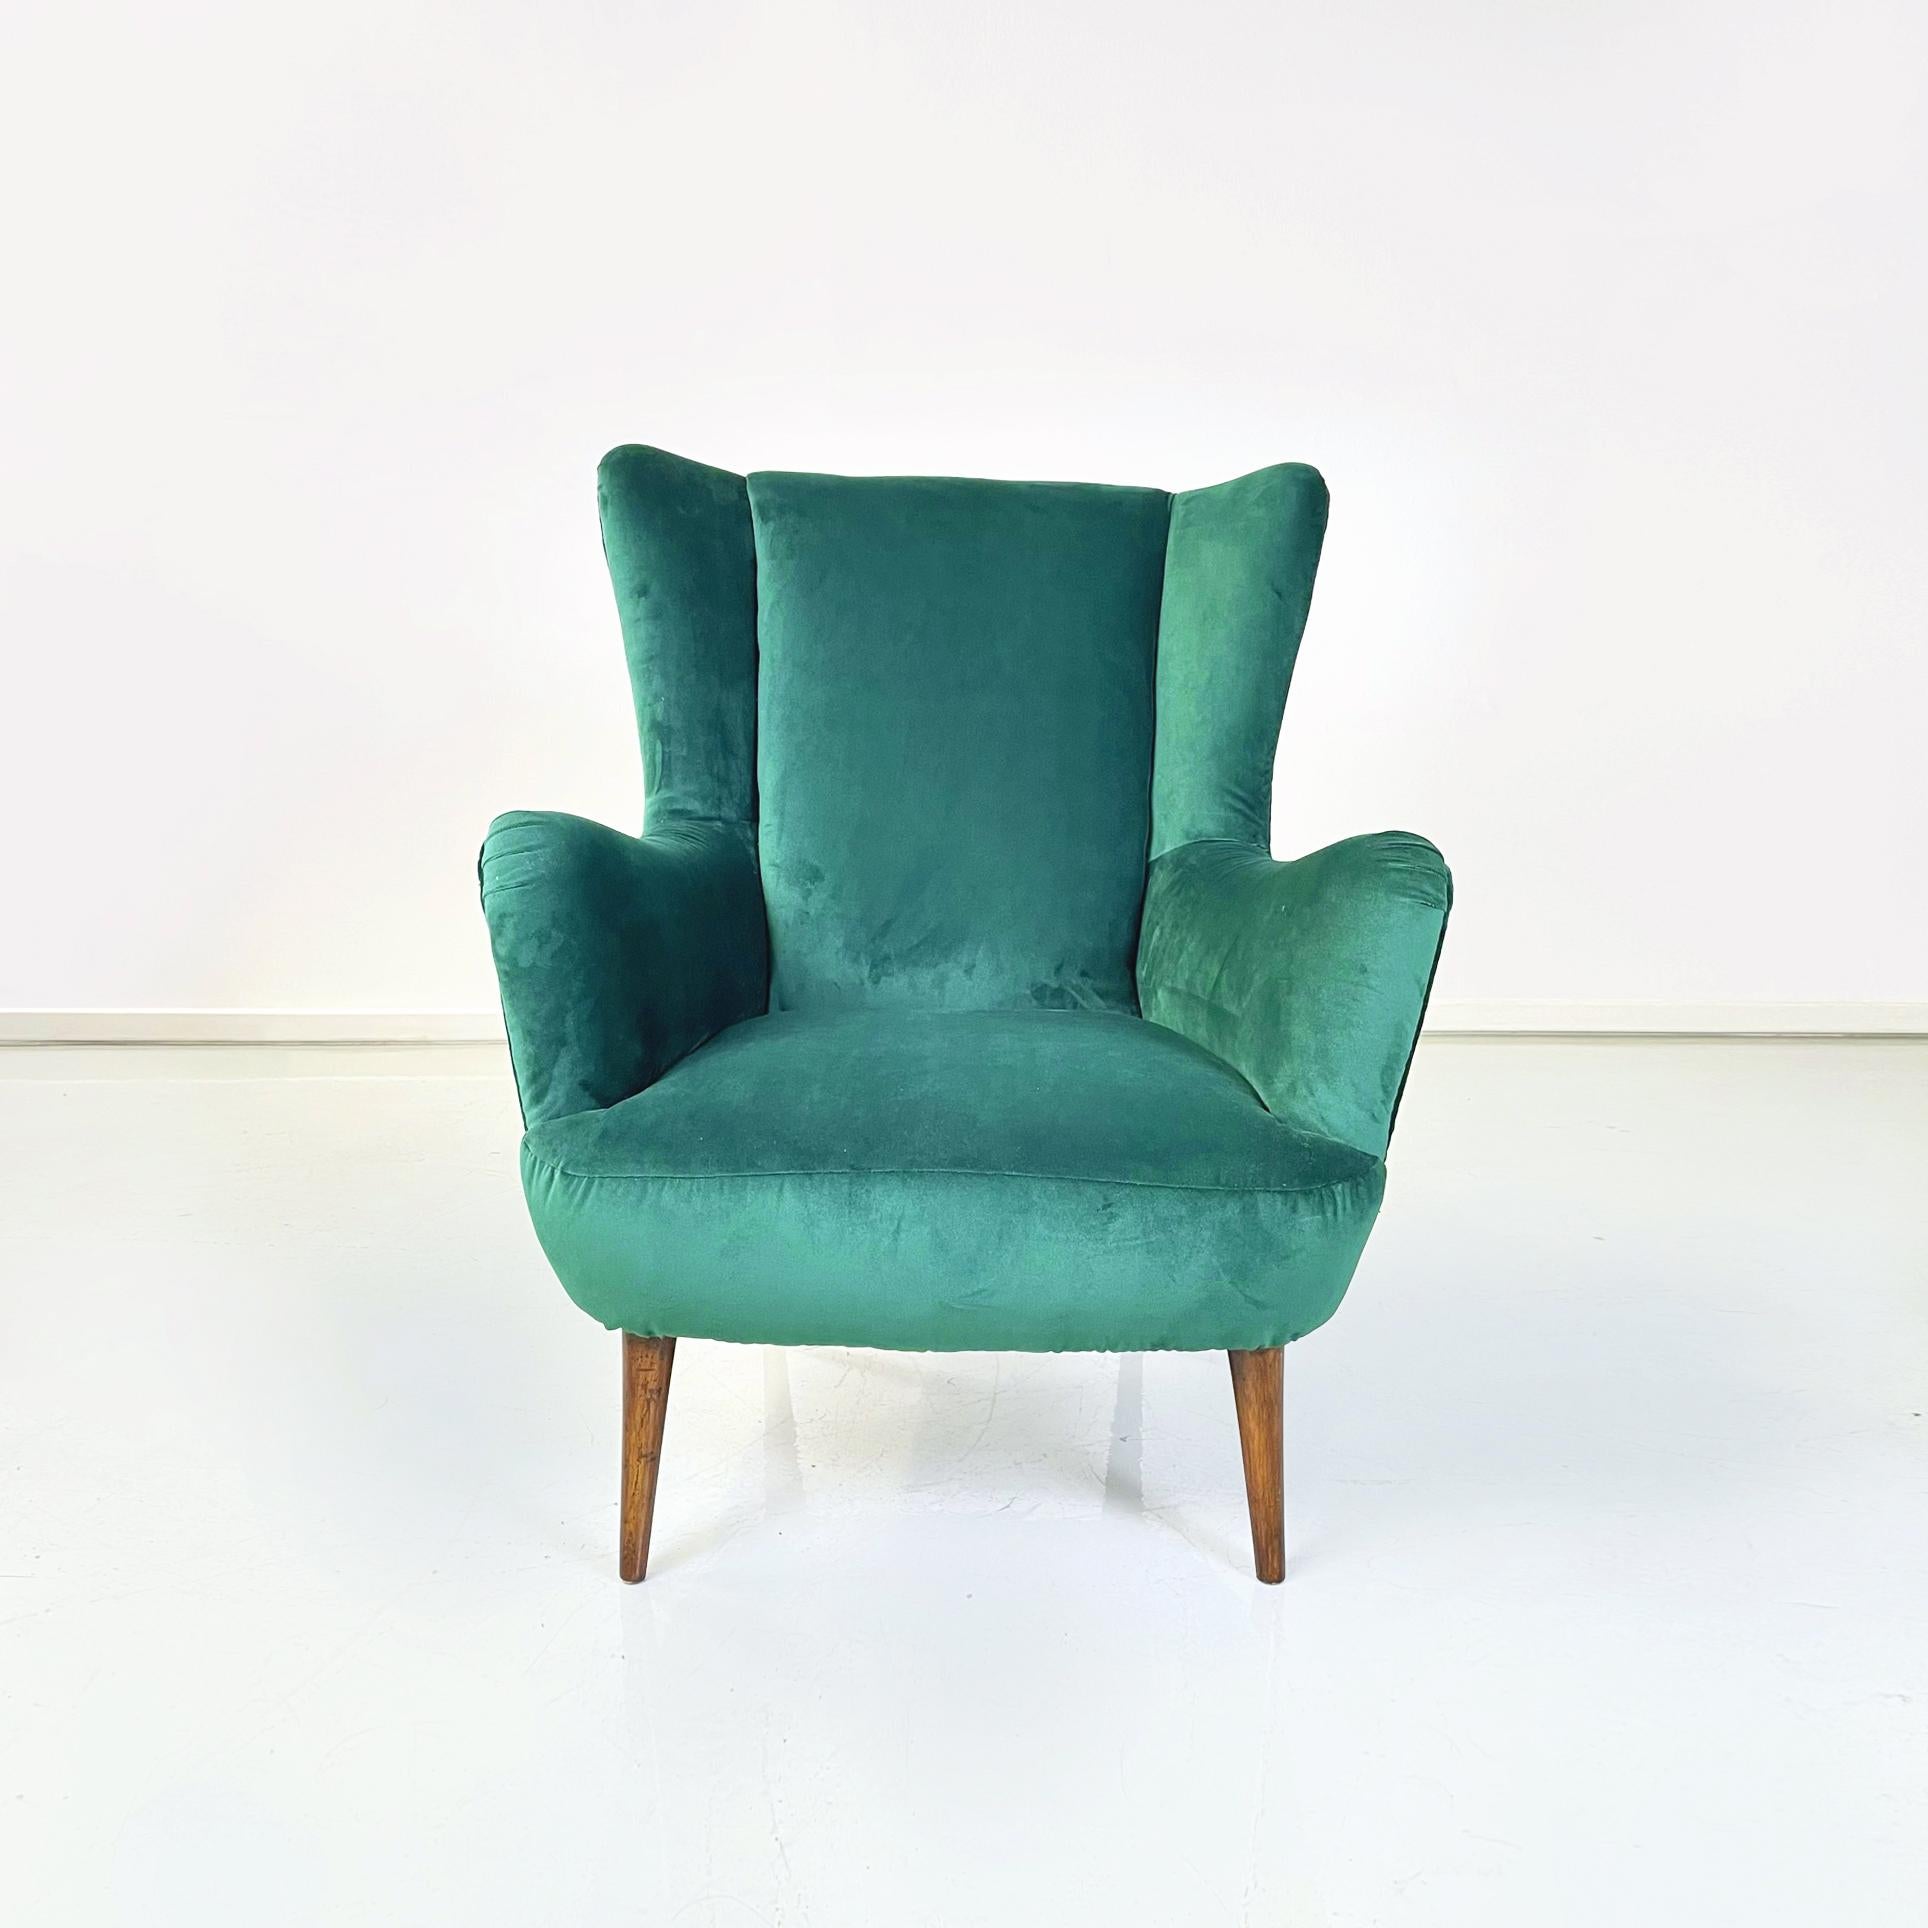 Italian Mid-Century Modern armchairs in forest green velvet and wooden legs, 1950s
Pair of Classic and fantastic armchairs fully upholstered and covered in forest green velvet. Armrests present. Conical wooden legs.
1950s.
Excellent condition, fully